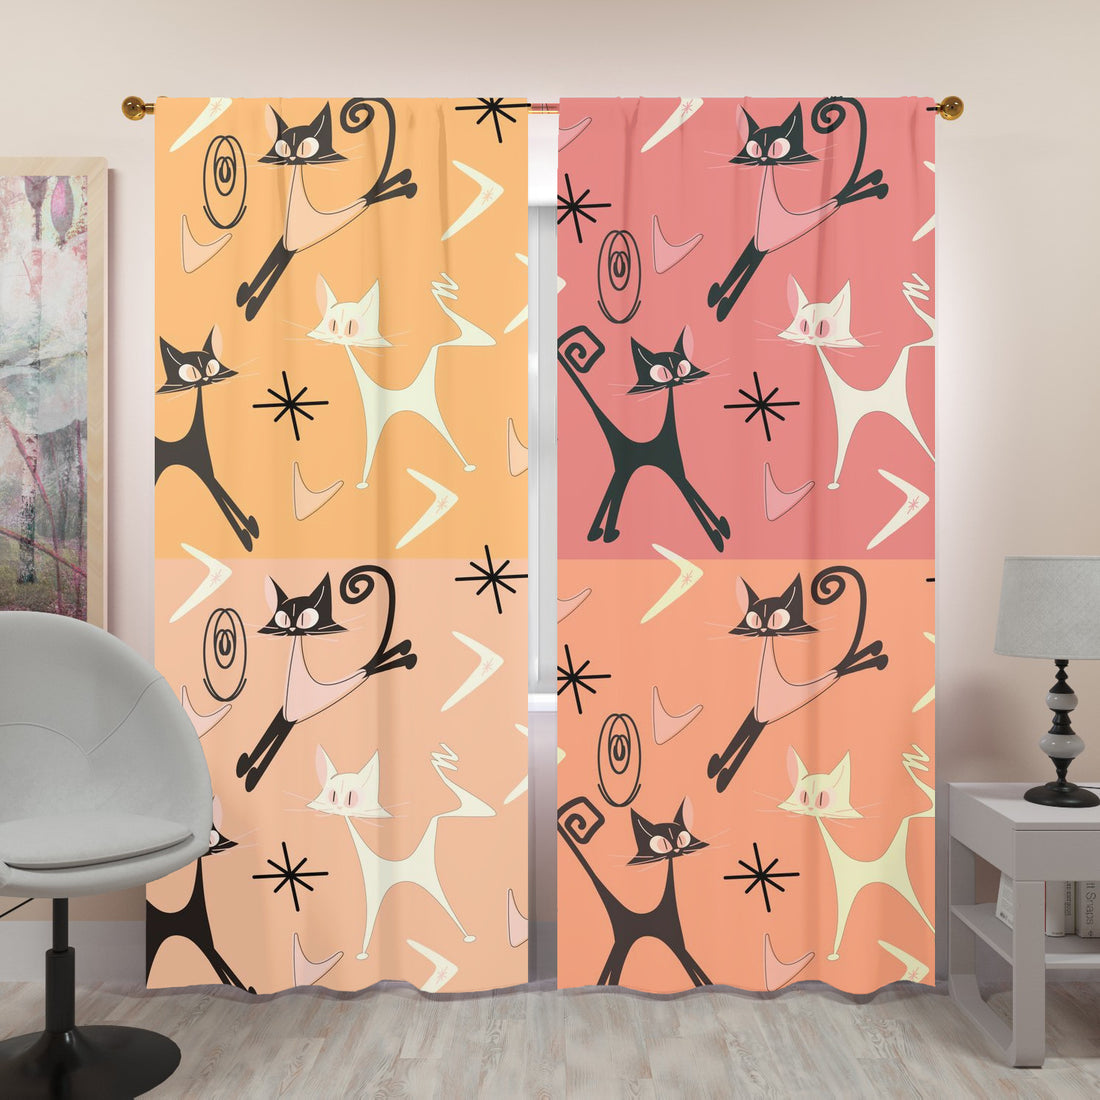 Atomic Cat, Kitschy Whimsical Patchwork Mid Mod Window Curtains (two panels)Window Curtains (two panels)